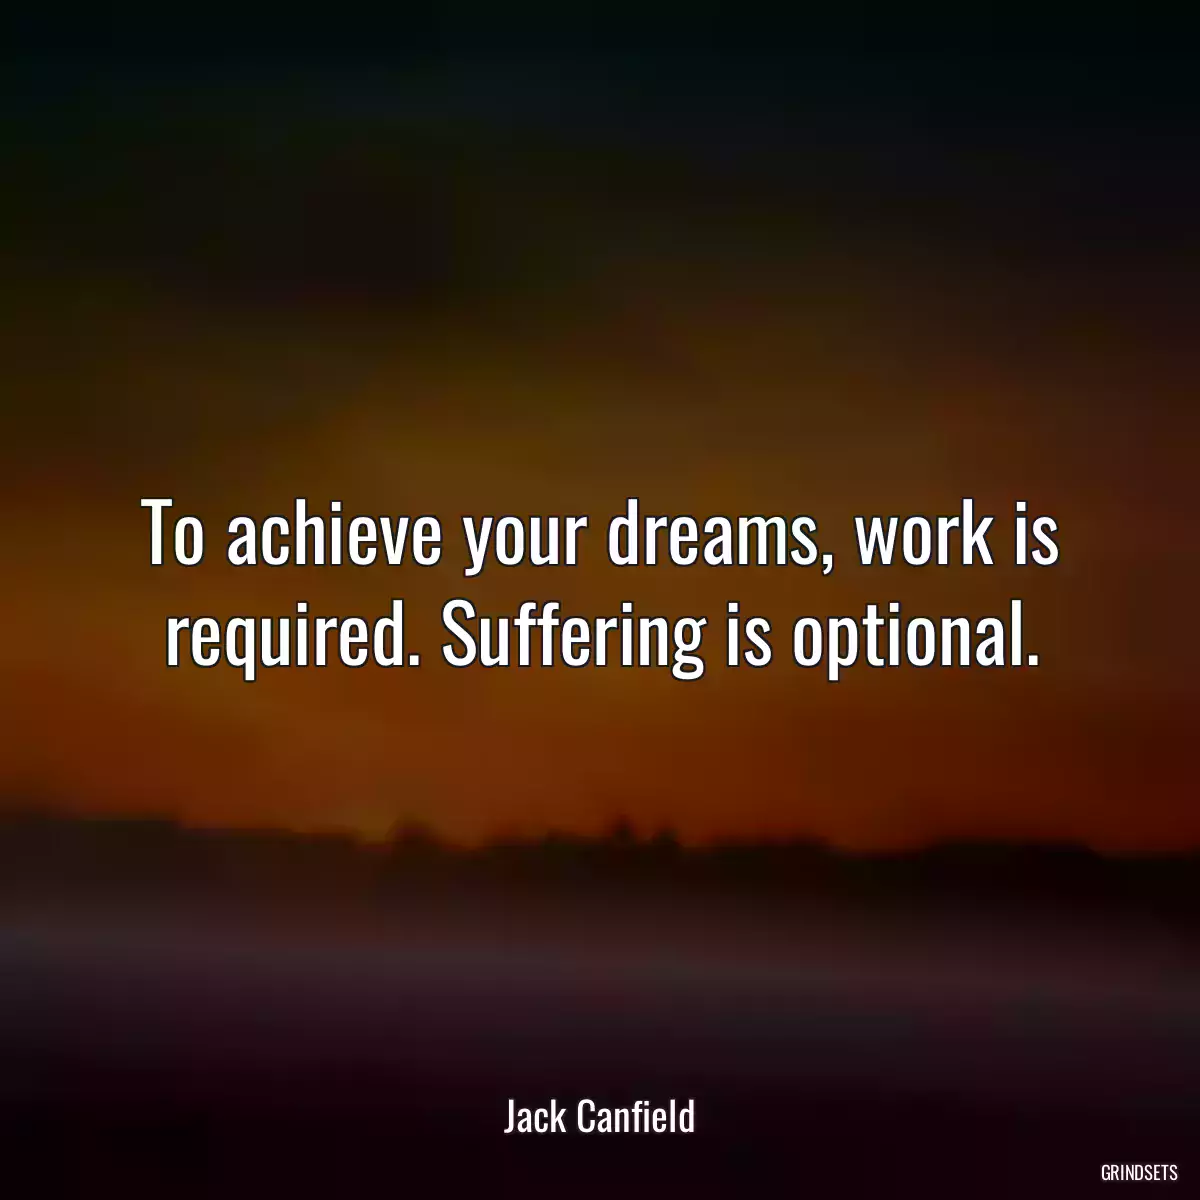 To achieve your dreams, work is required. Suffering is optional.